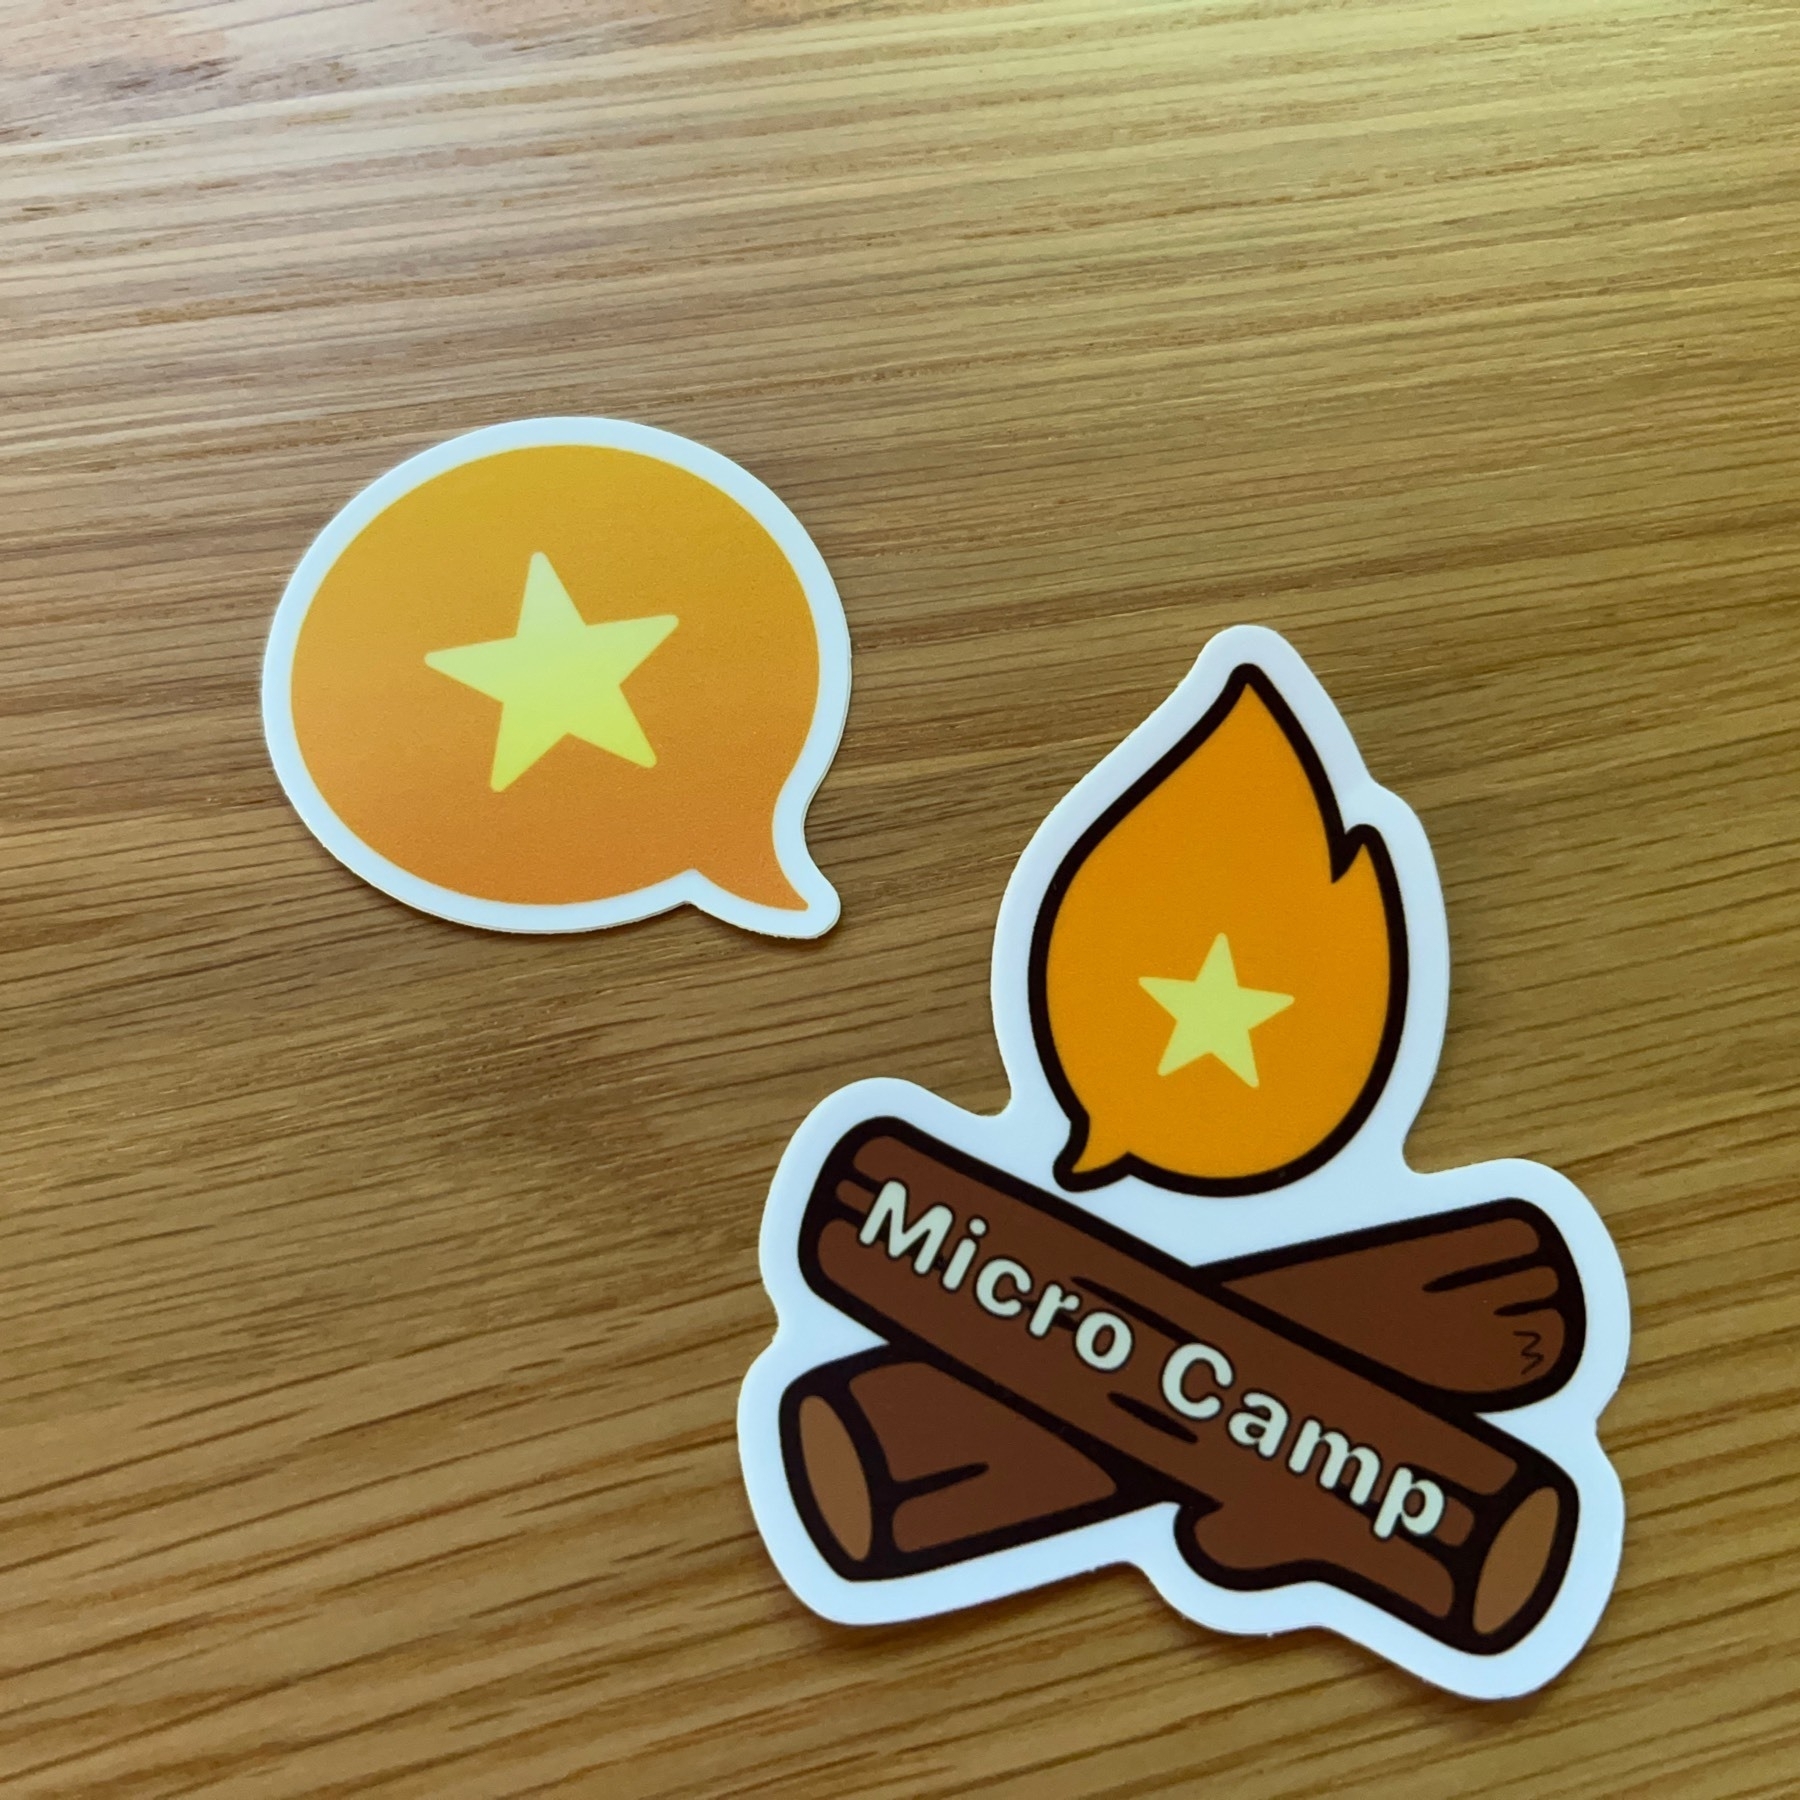 micro.blog sticker and Micro Camp logo of two logs and a fire on a sticker on a wooden tabletop. 